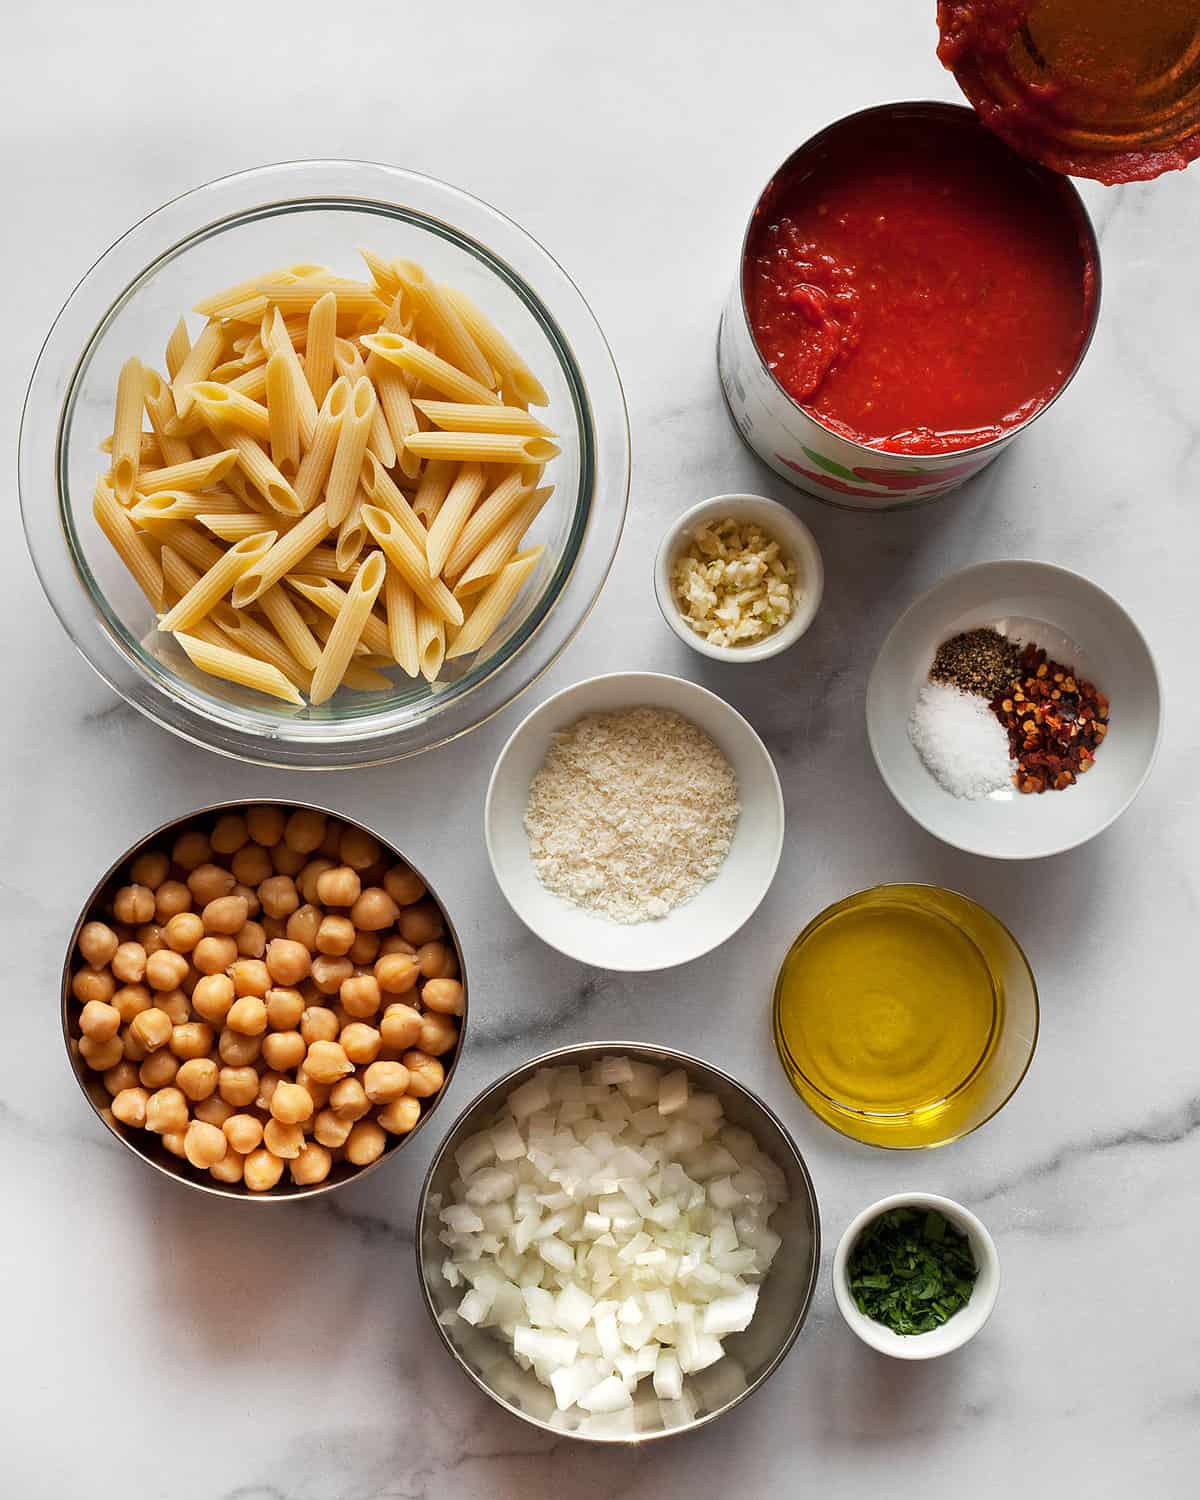 Ingredients including penne, chickpeas, canned tomatoes, garlic, olive oil and spices.